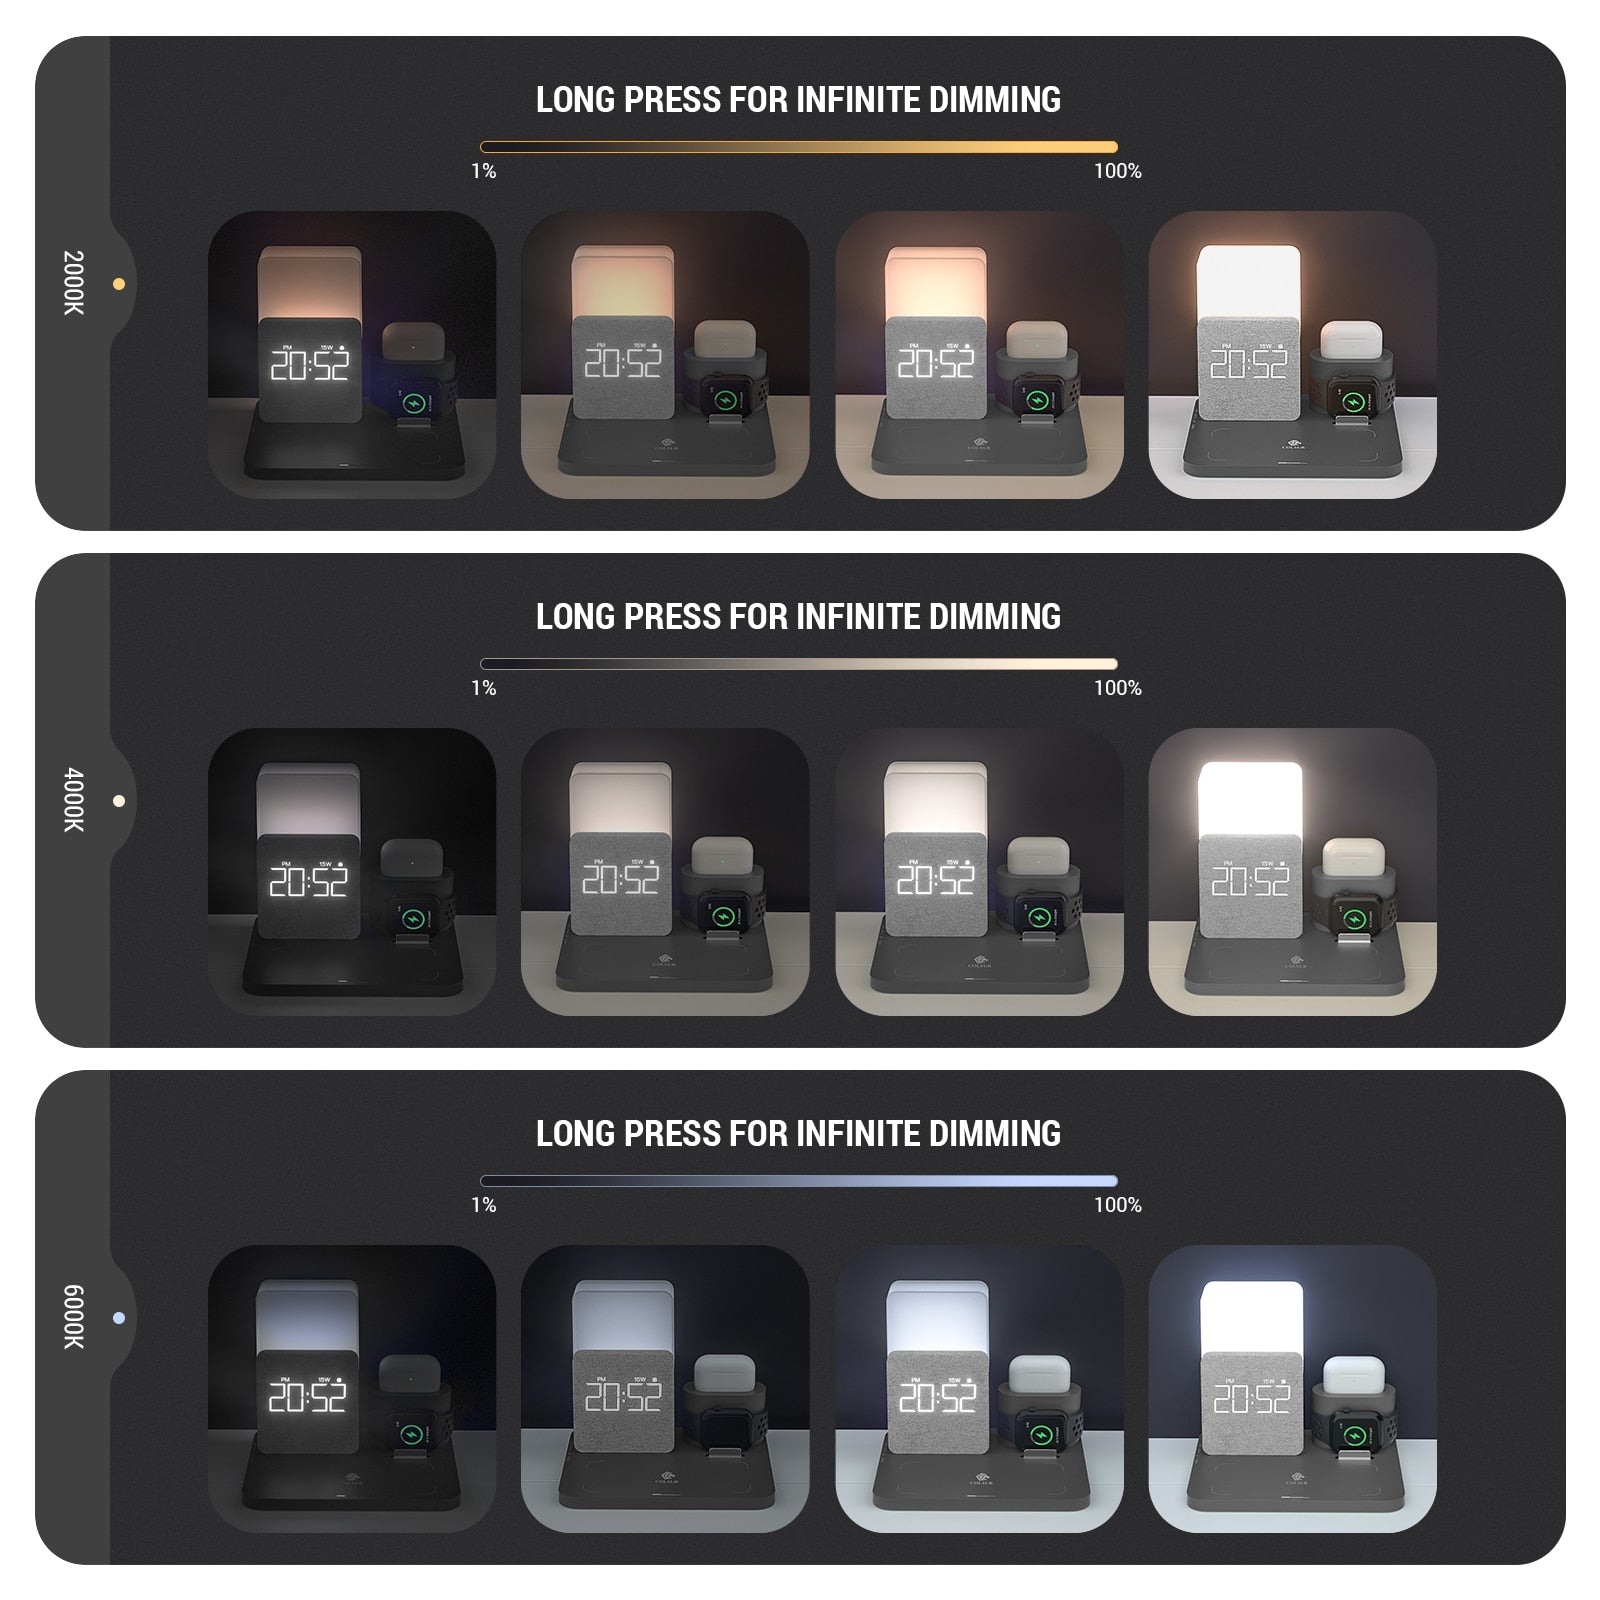 diagram showing the different light options of a charging dock alarm clock